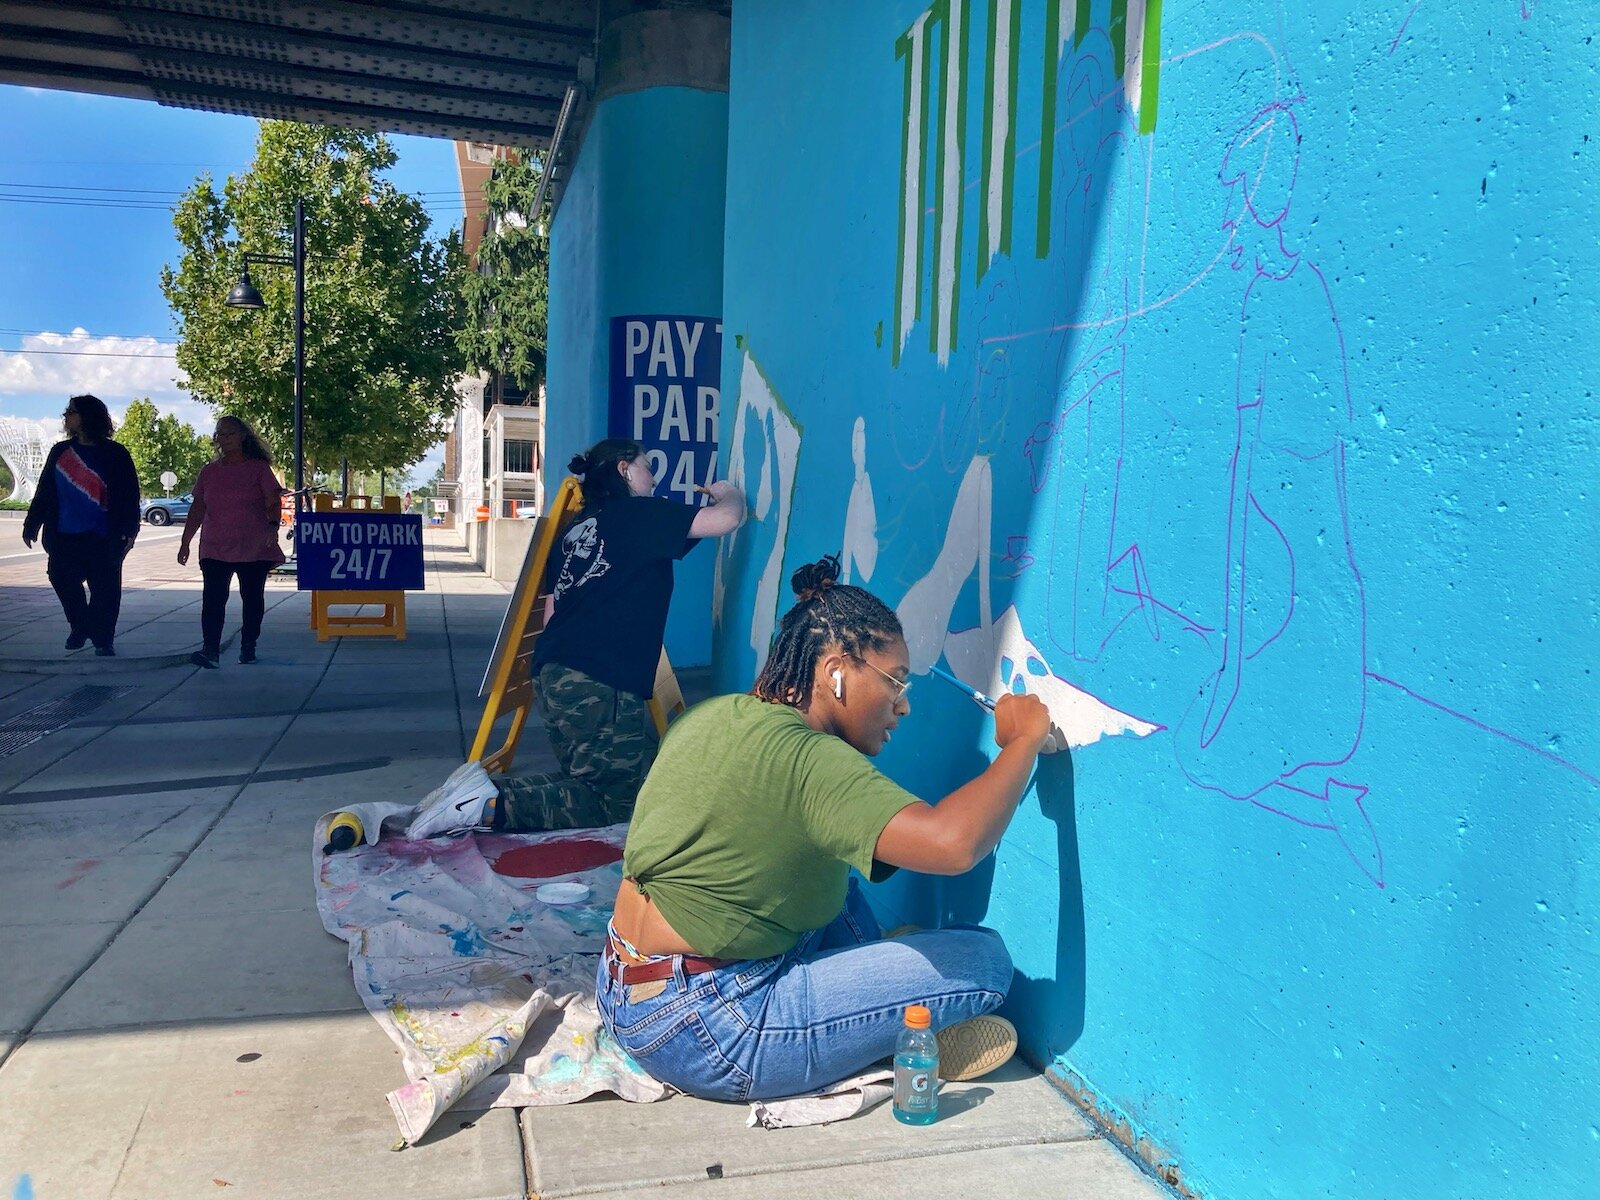 A new Art This Way project, called The Unity Mural, is currently being created steps away from The Landing at the railroad underpass near Harrison and Dock streets.